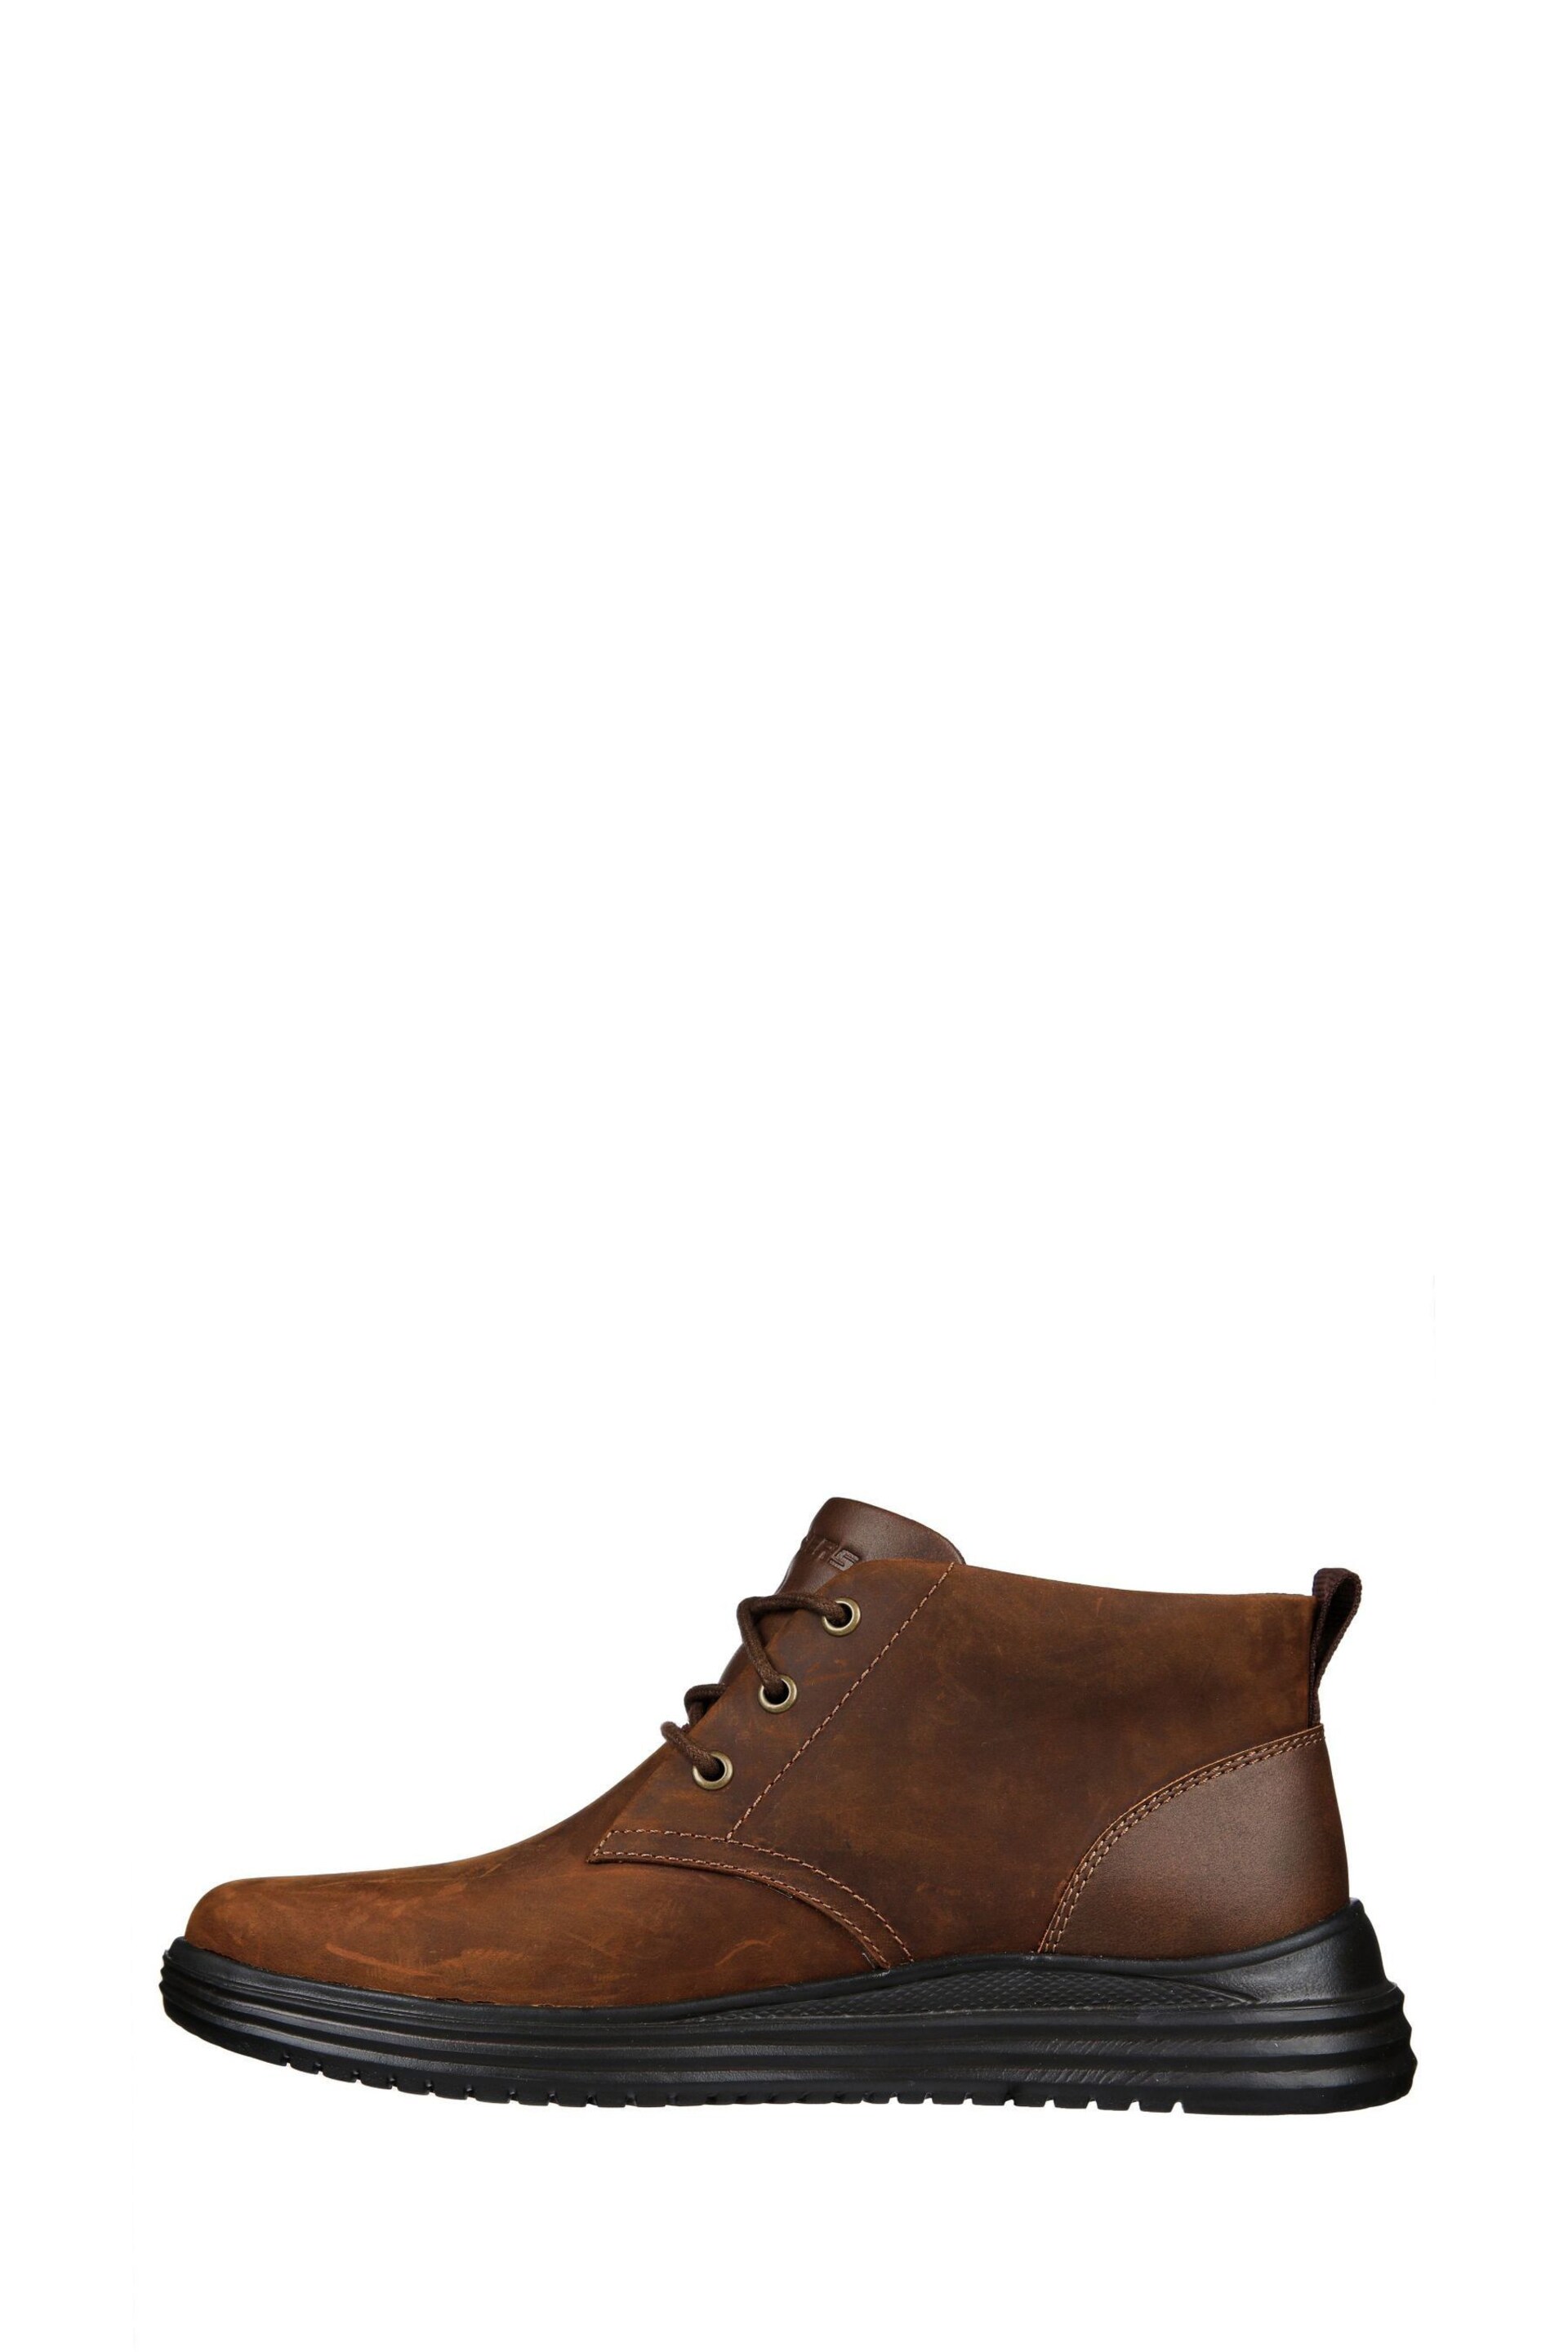 Skechers Brown Proven Mens Boots - Image 2 of 5